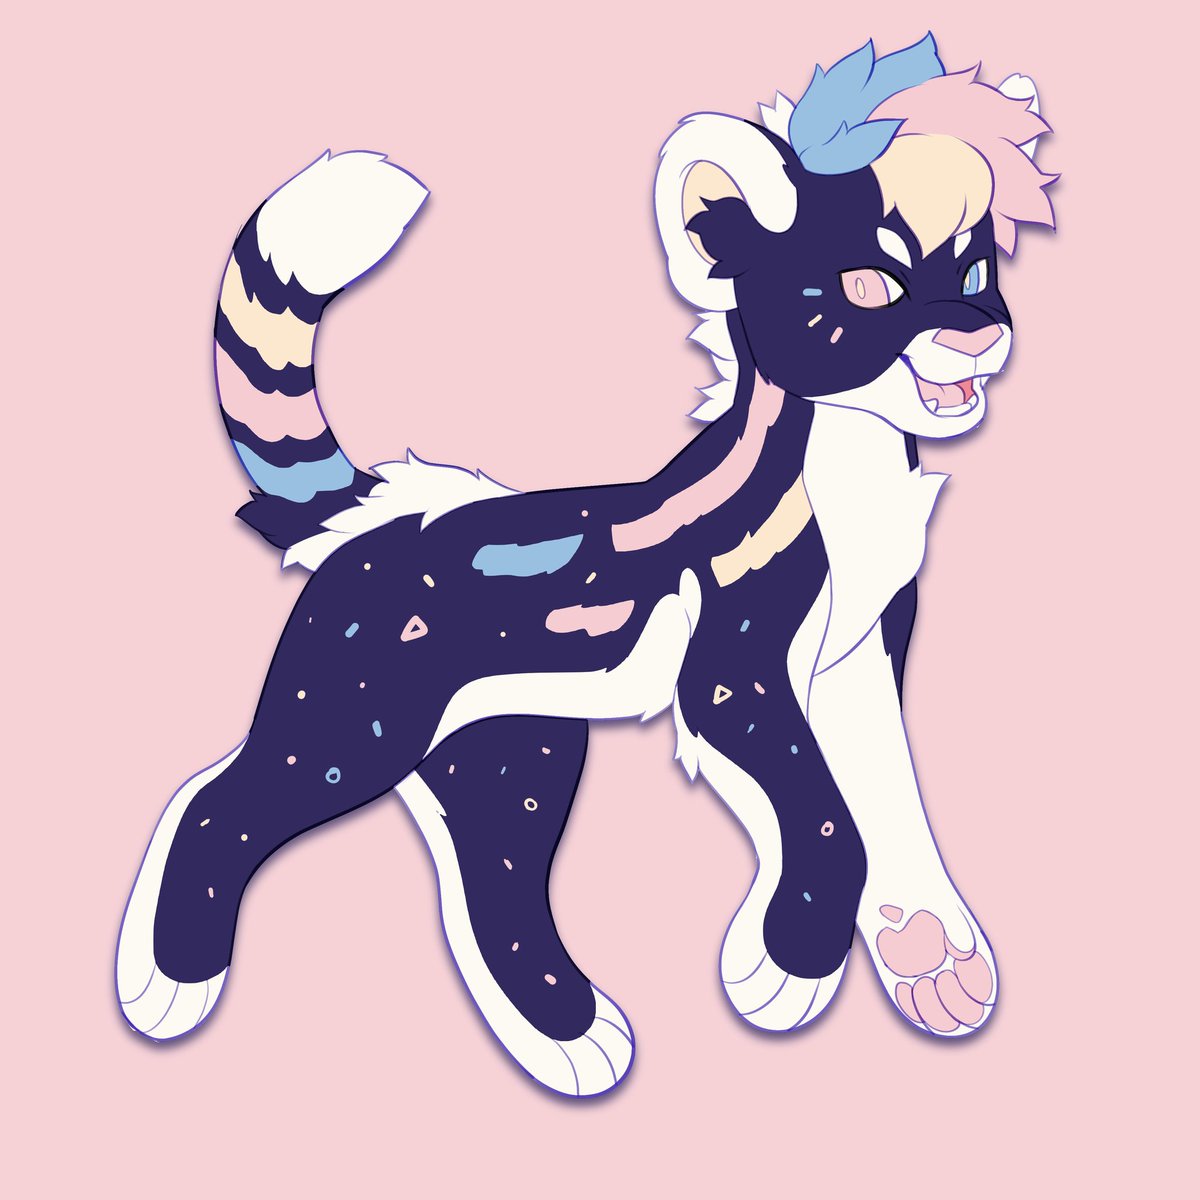 @shavedmink A lil funky coloured boi I bought. I need to make some more characters aaa